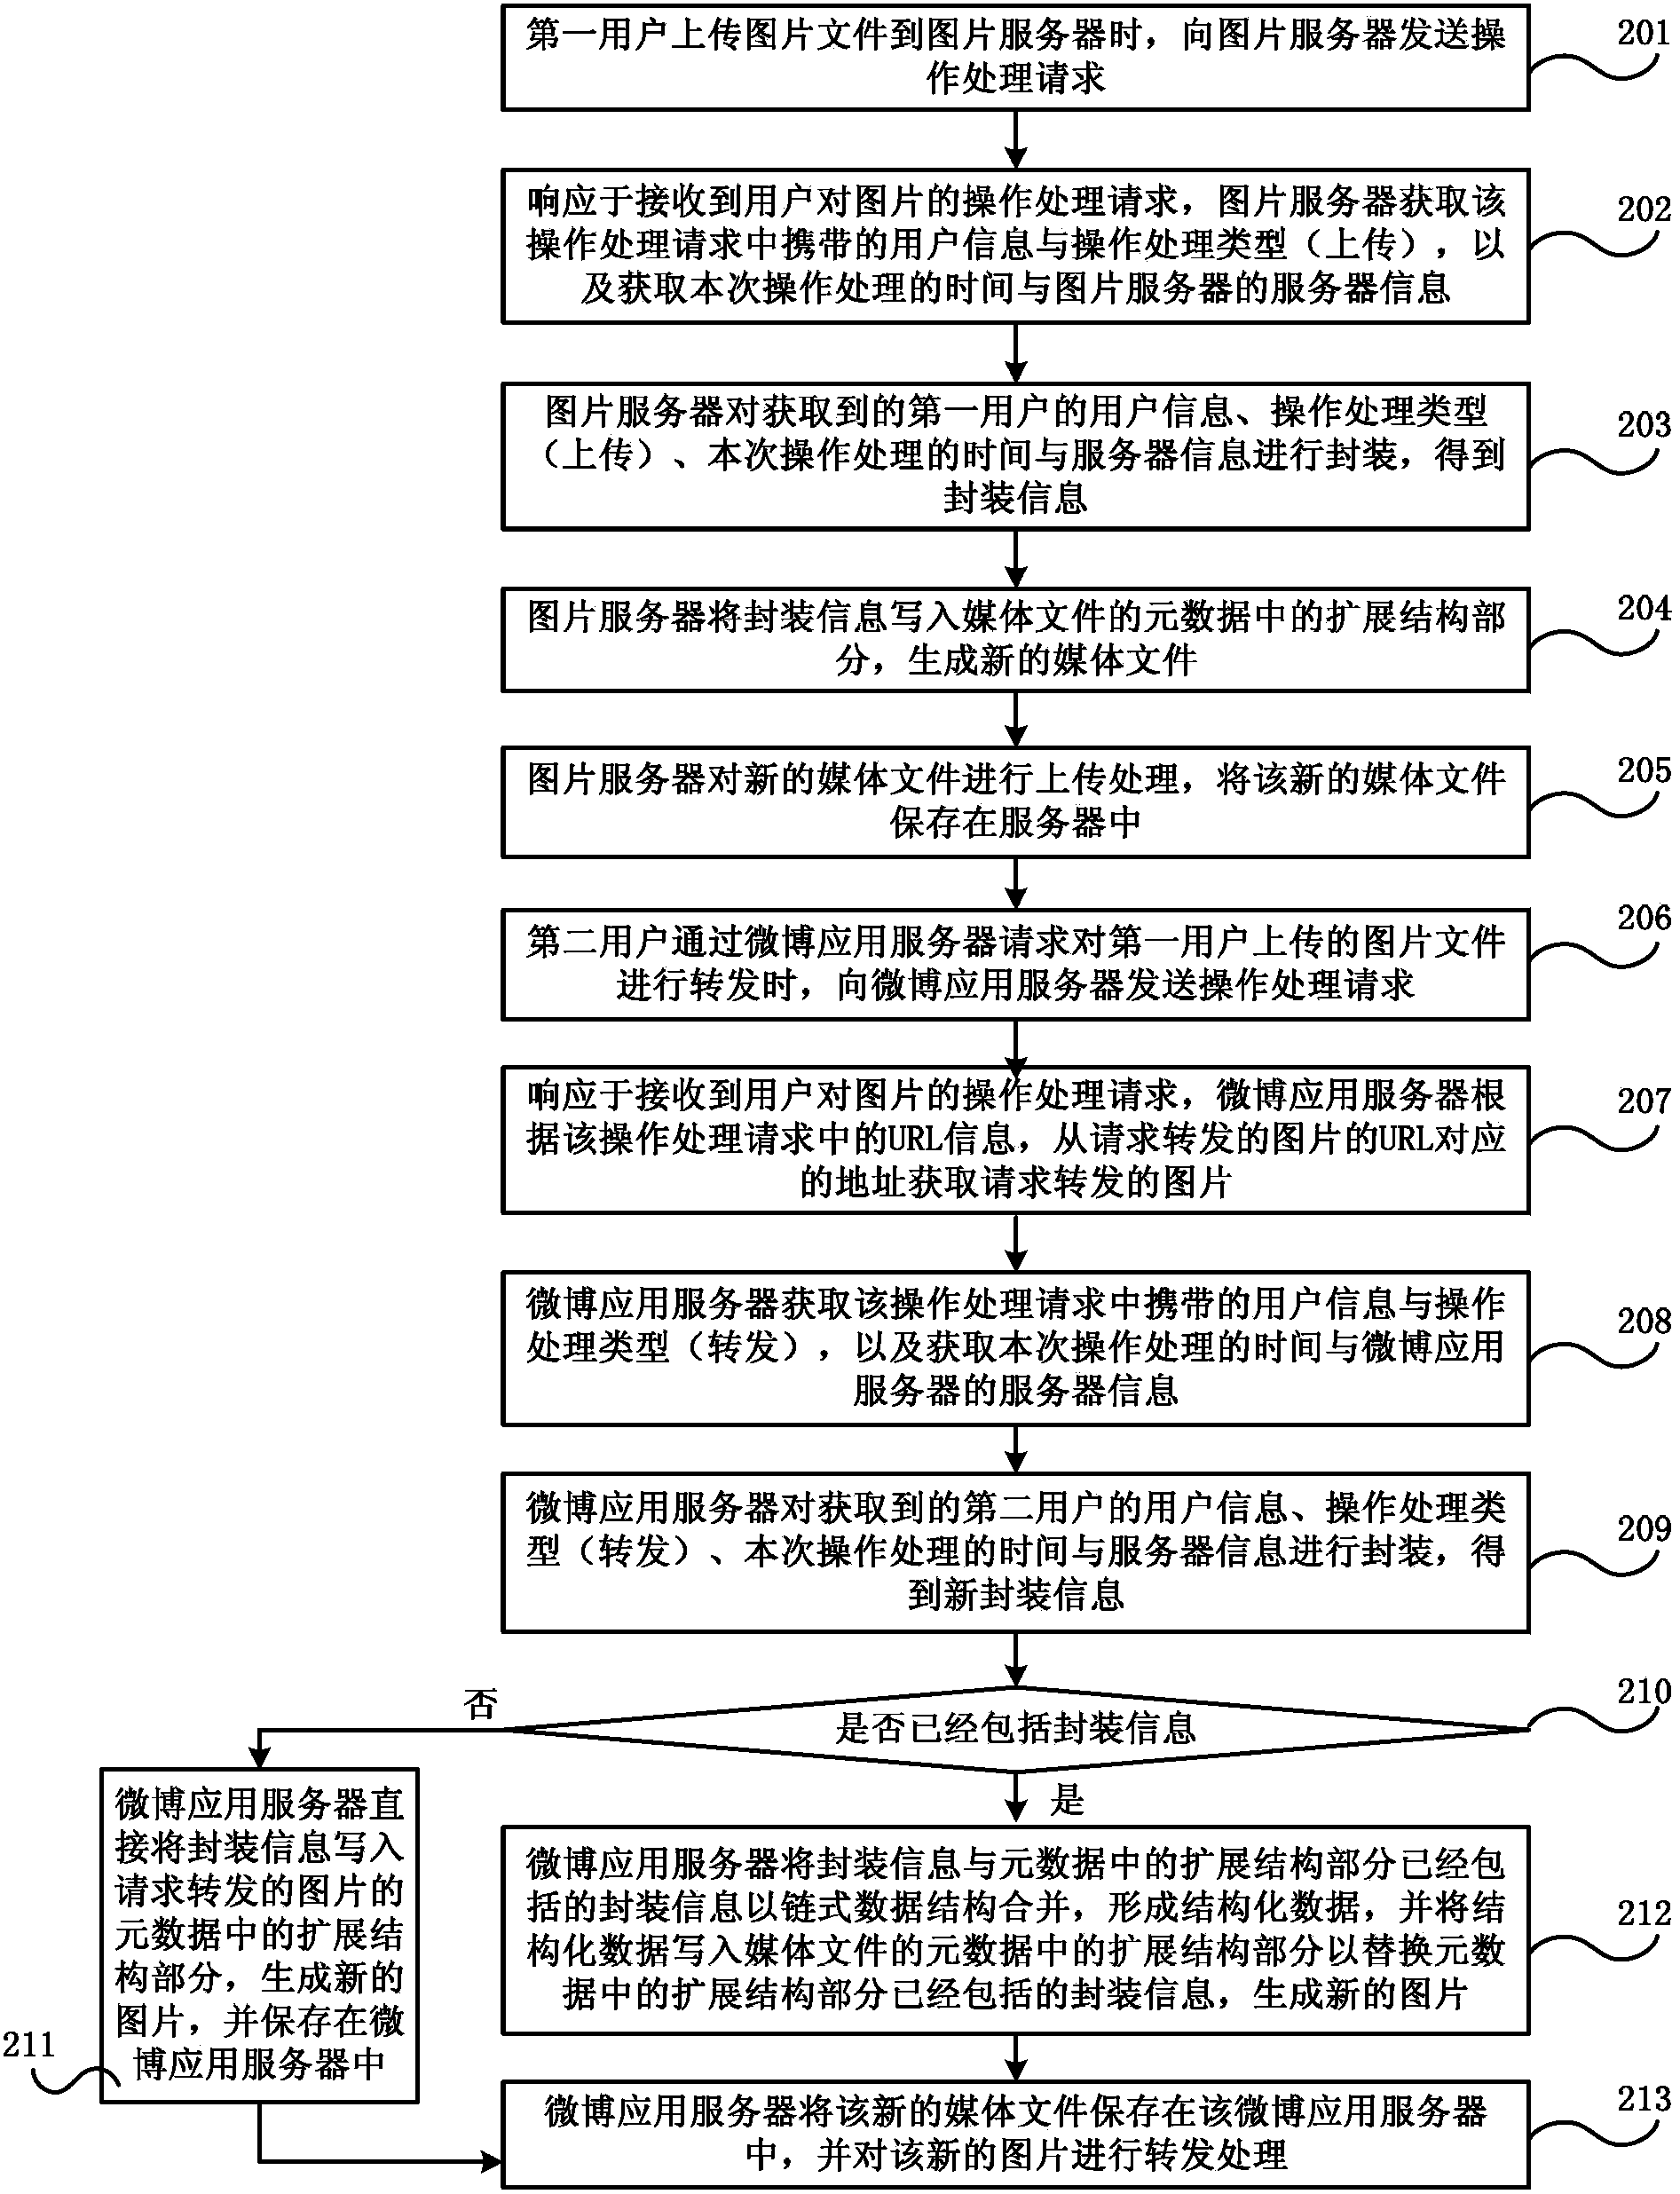 A source-tracing processing method of Internet media files, a server, and a communication system